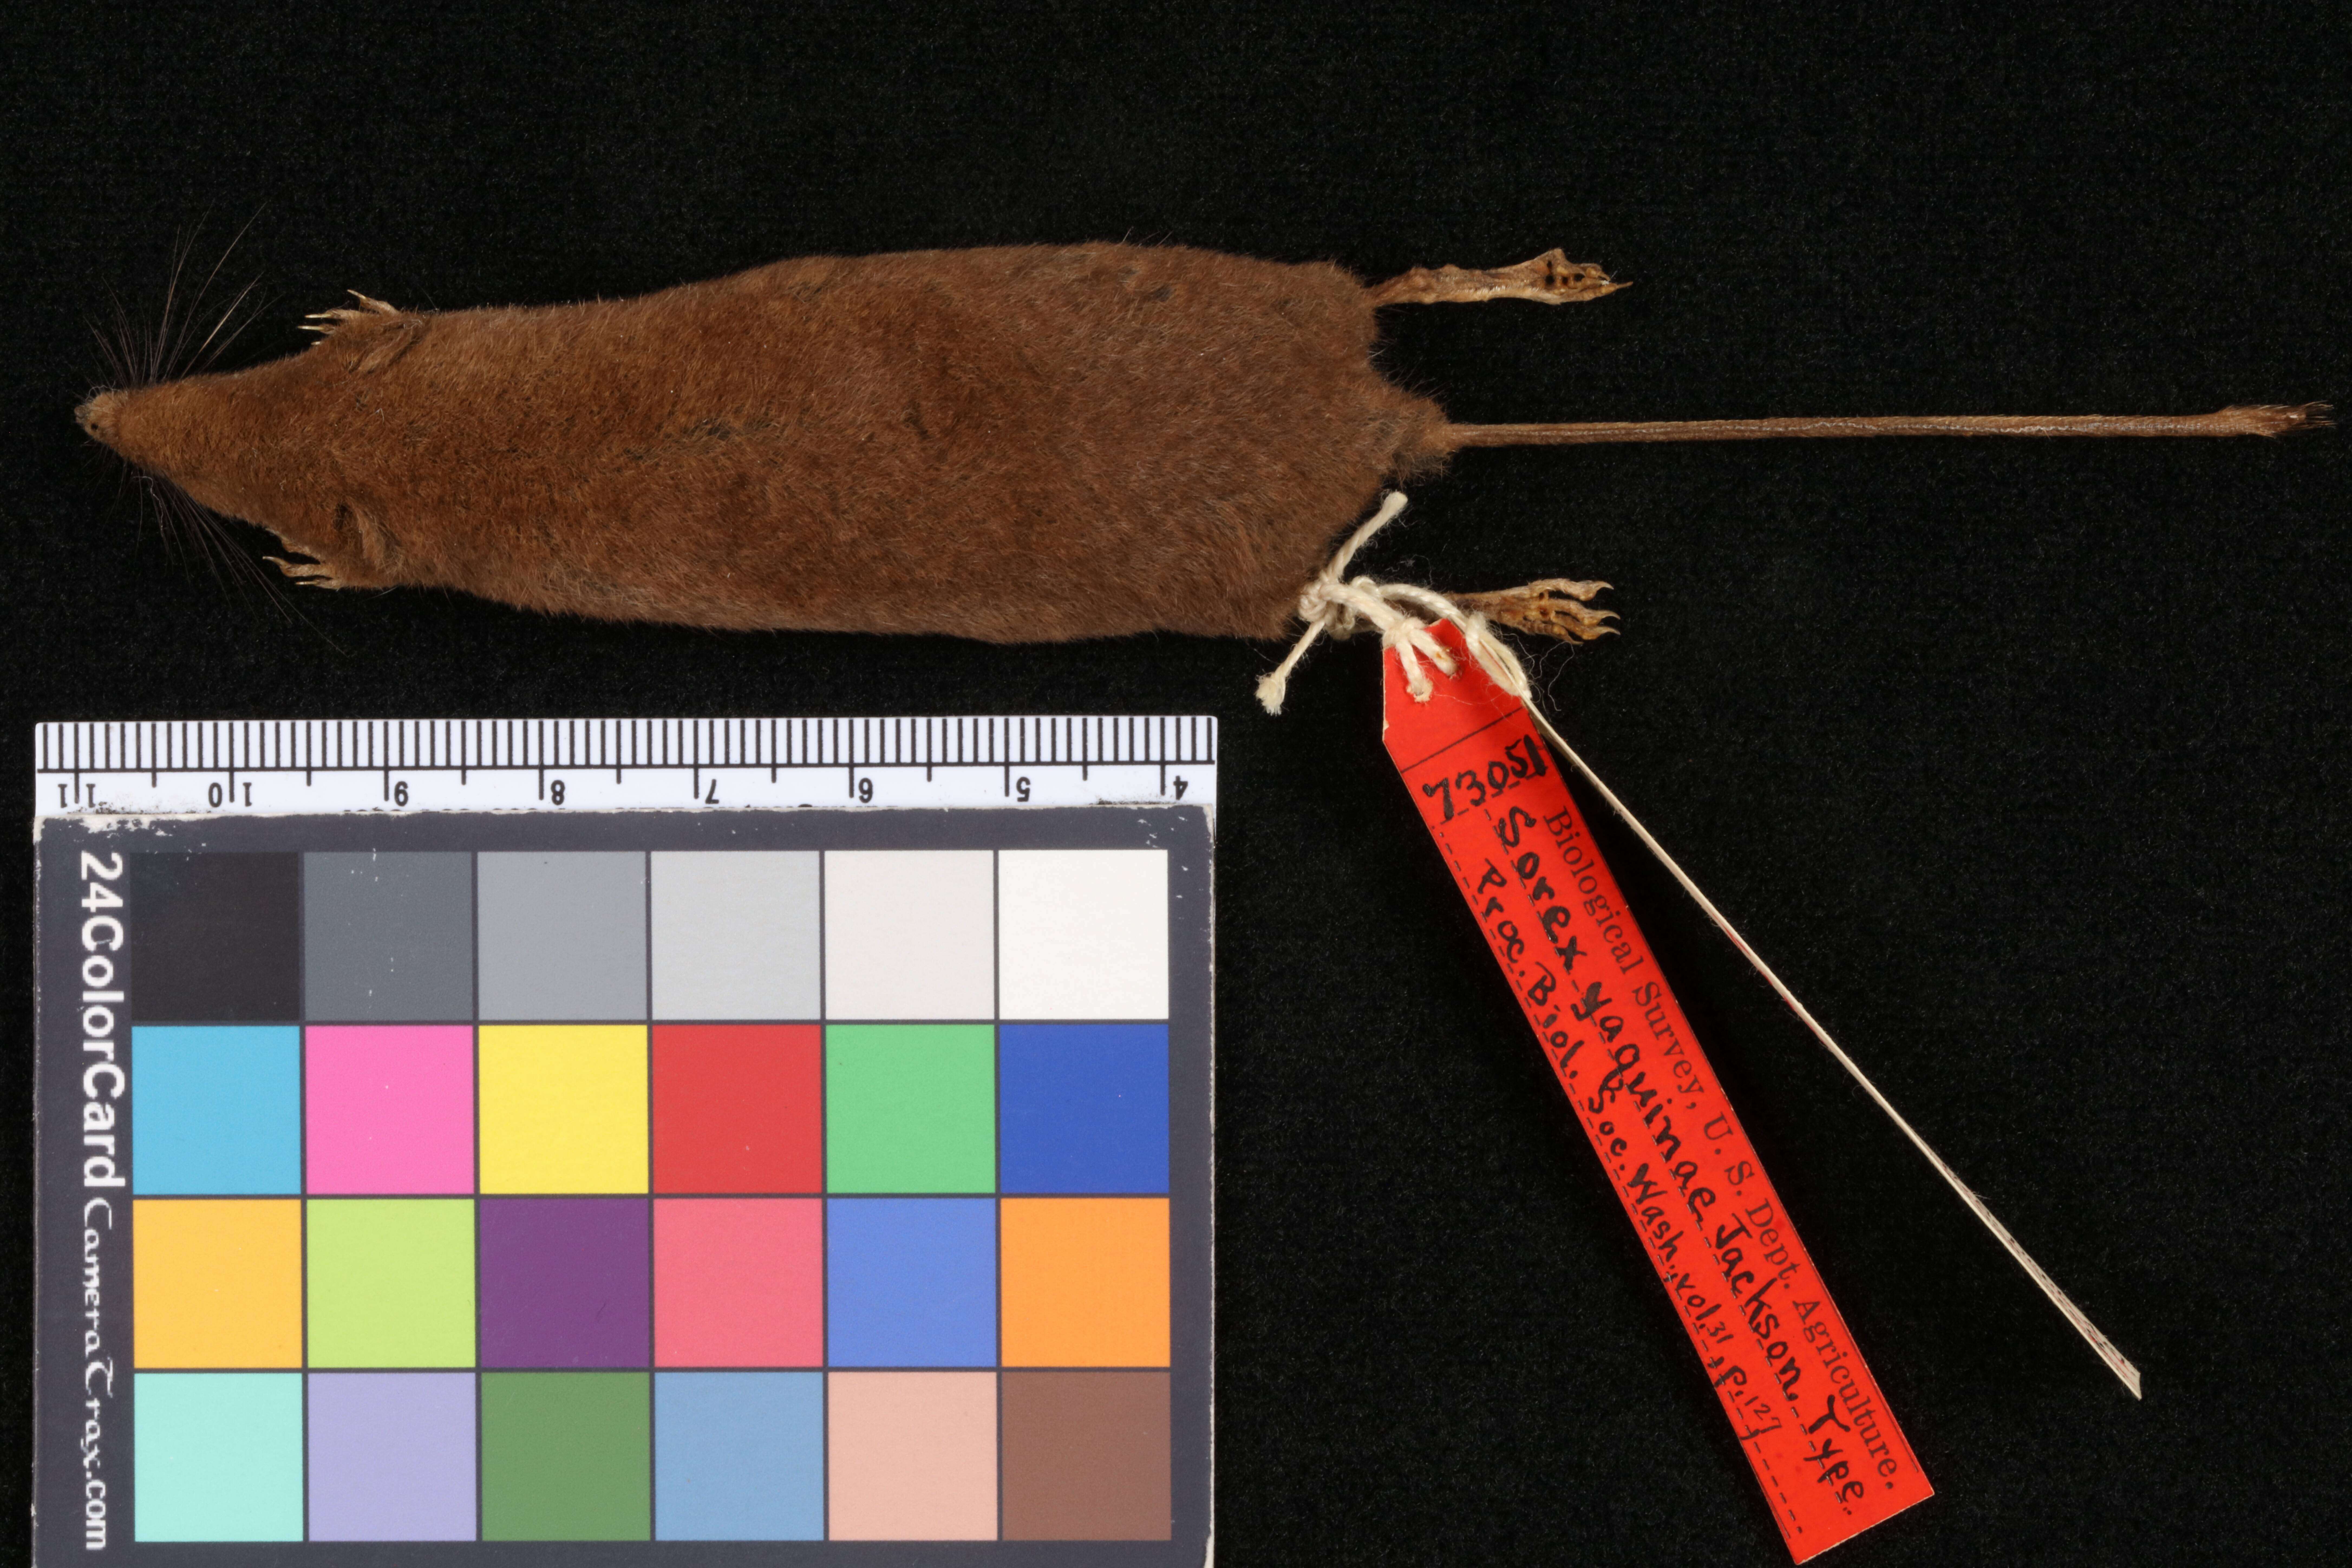 Image of Sorex pacificus pacificus Coues 1877